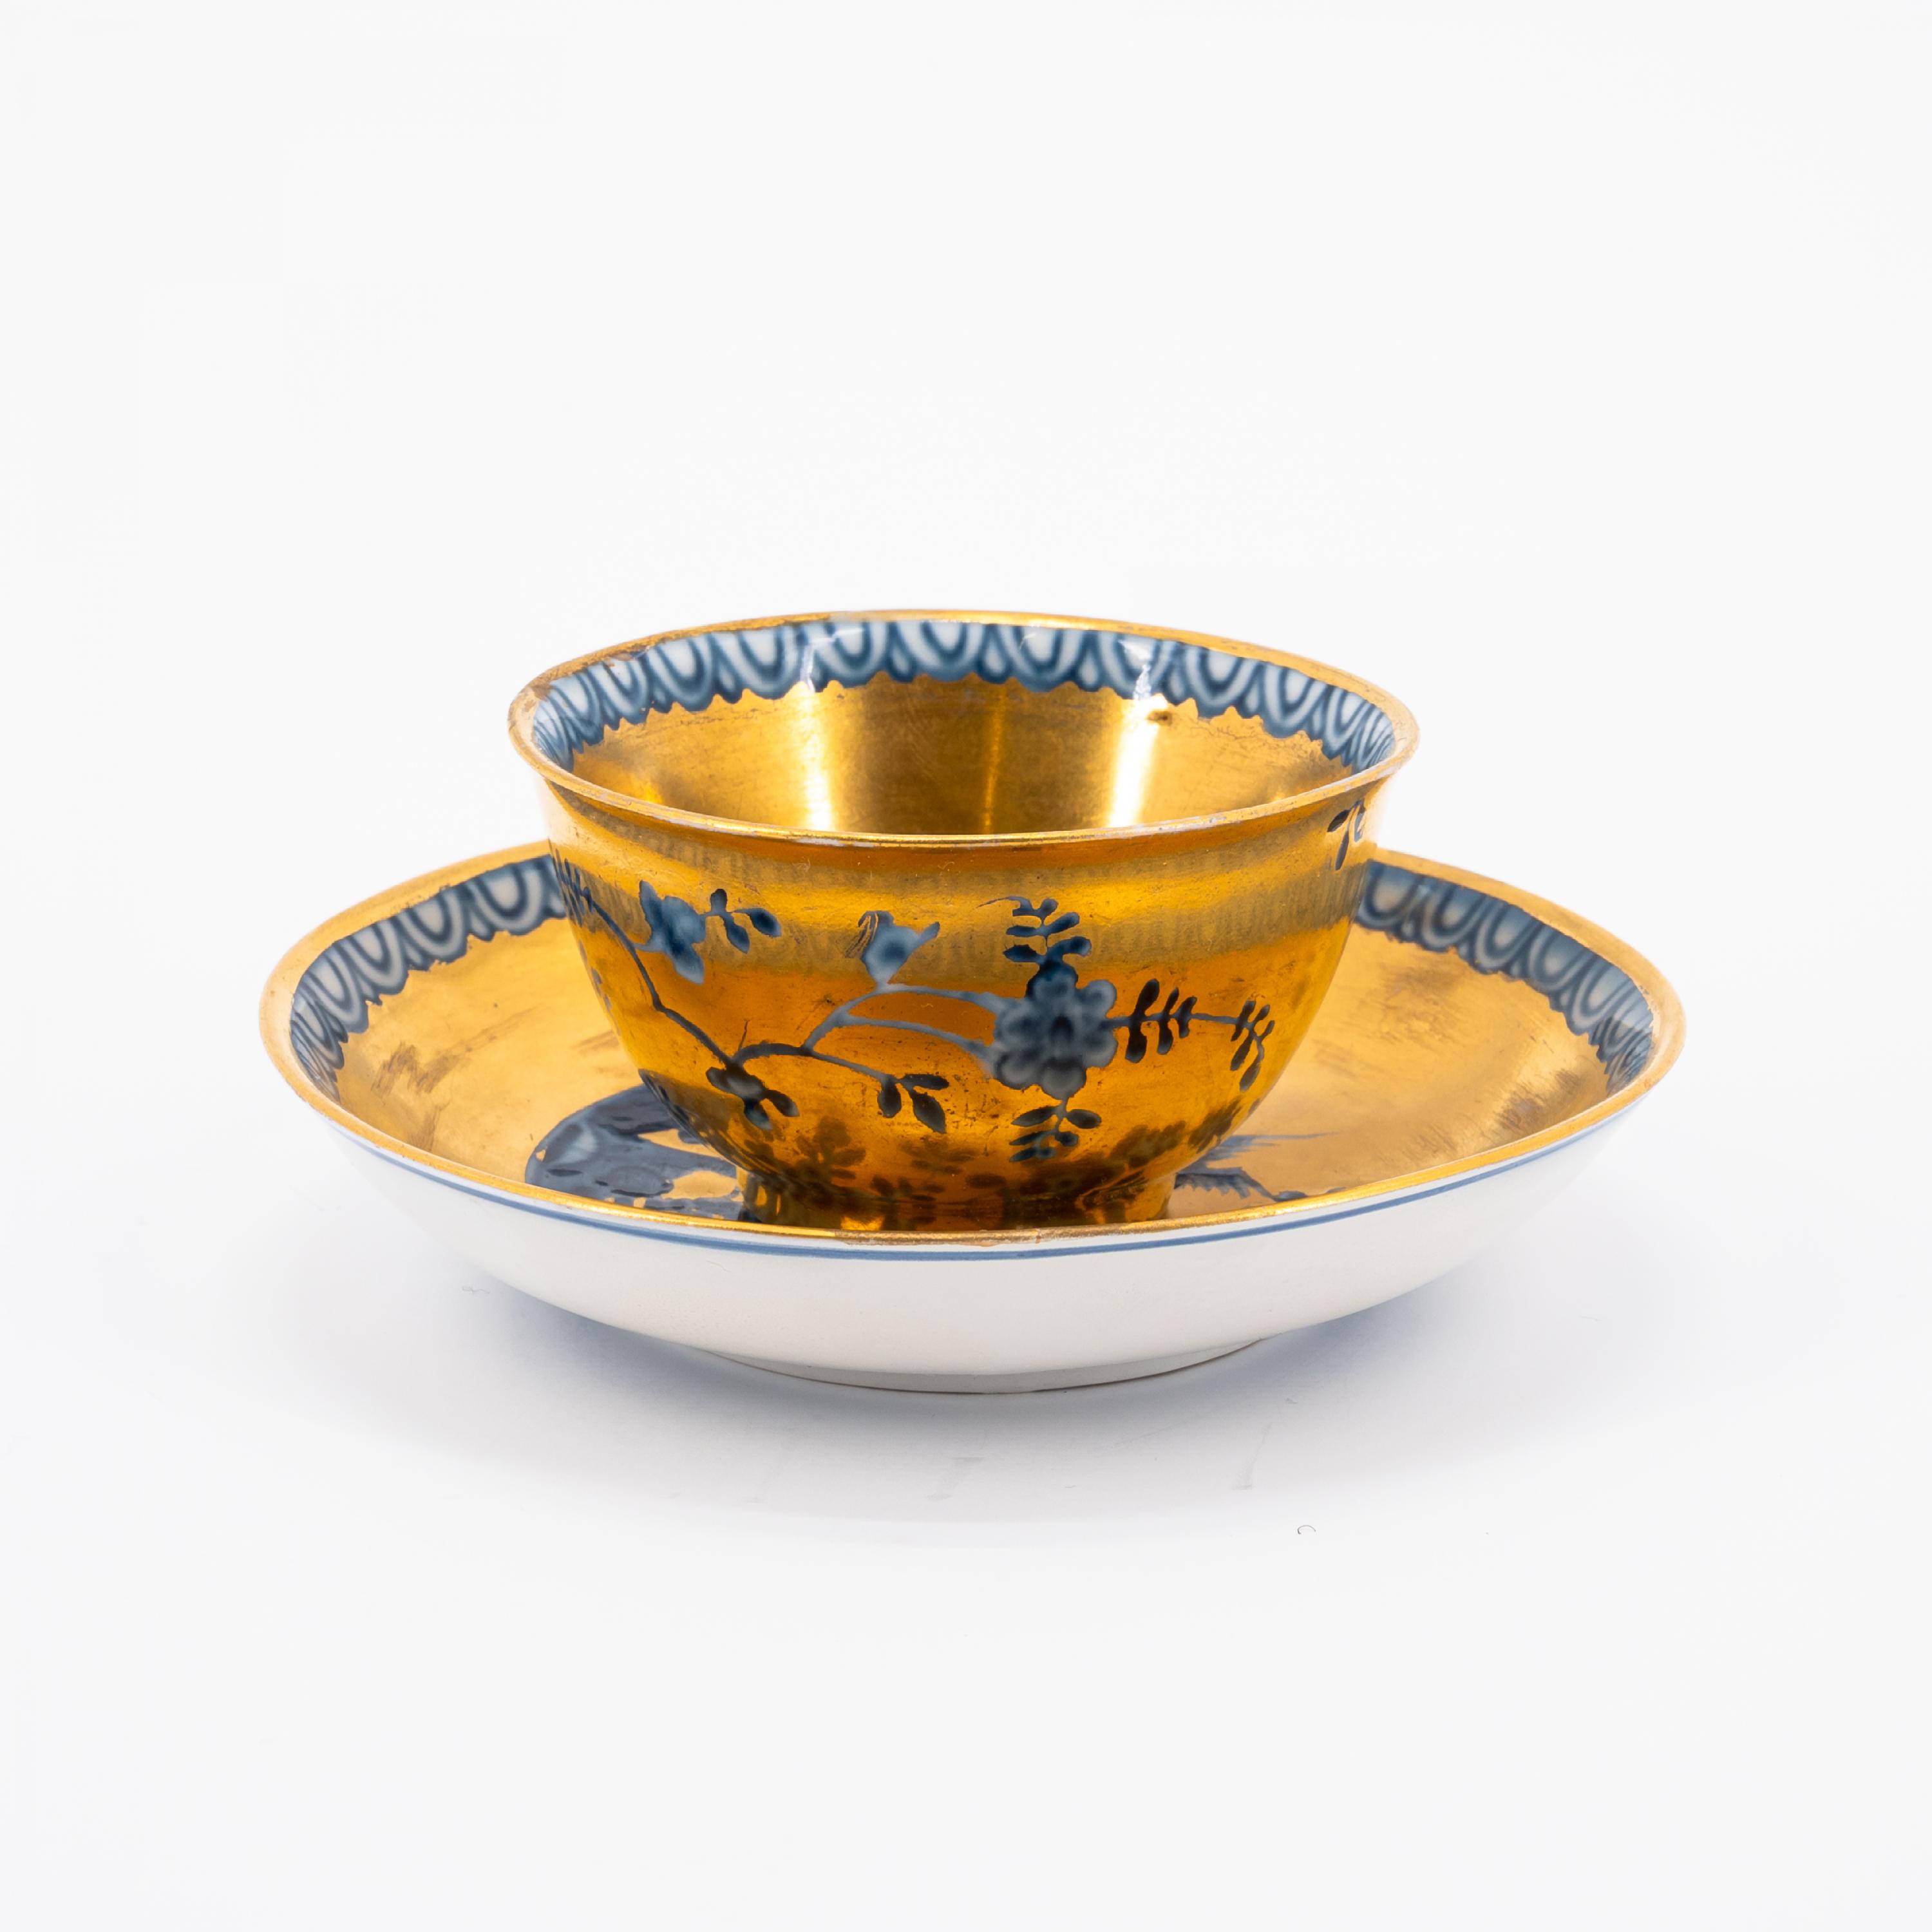 PORCELAIN ENSEMBLE OF SLOP BOWL, TWO CUPS AND SAUCERS WITH GILDED DECOR - Image 12 of 16